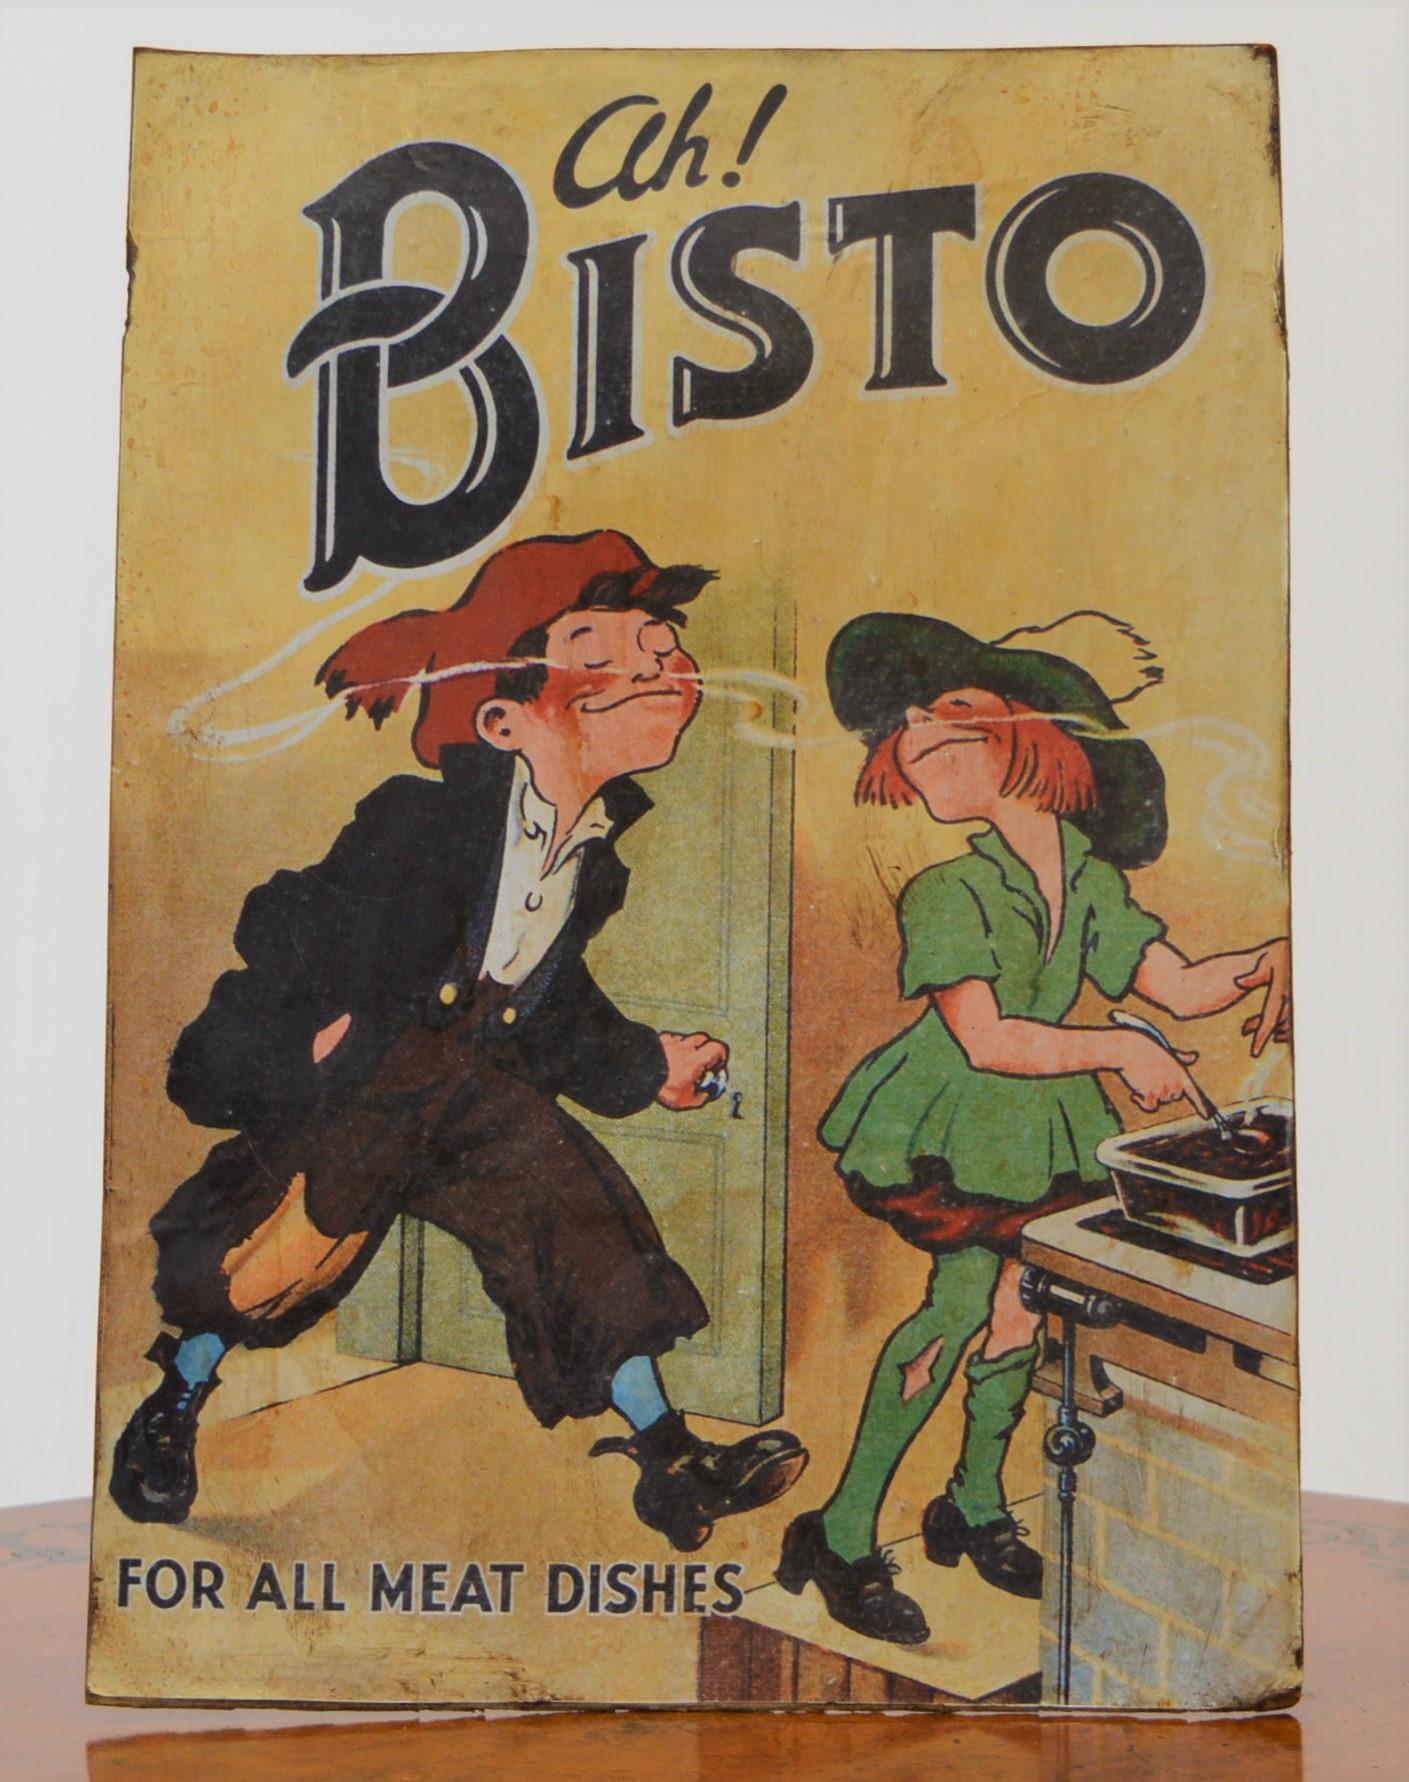 ah Bisto! For all meat dishes counter advertising sign {36 cm H x 25 cm W}.